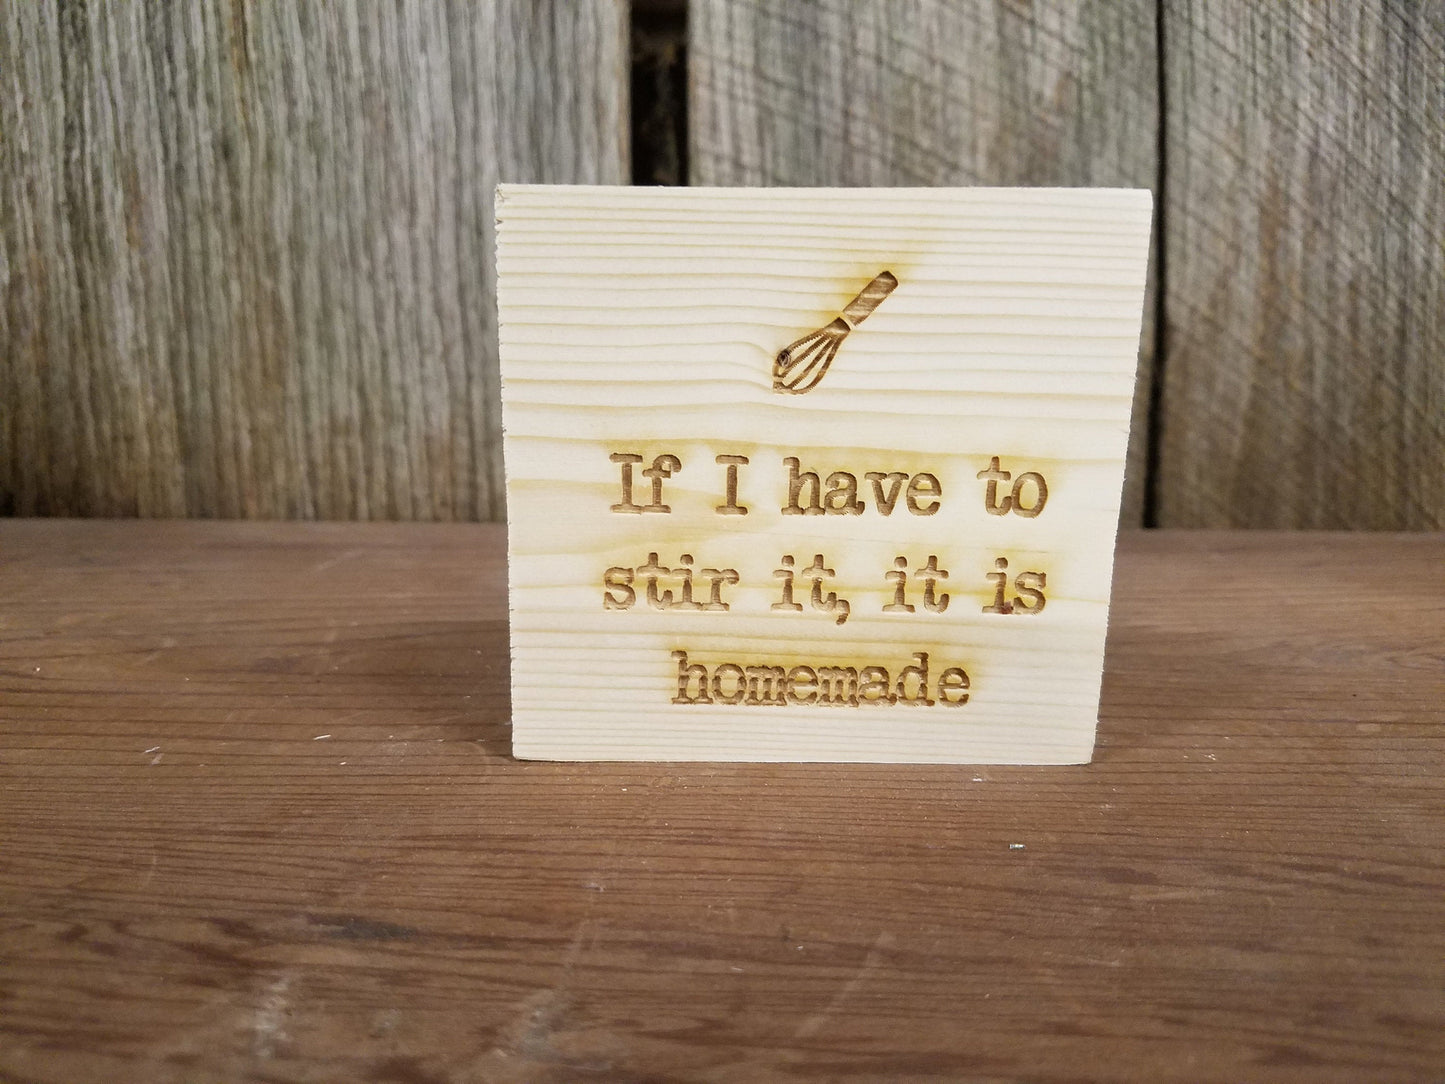 If I Have to Stir It, It is Homemade, Kitchen Tiered Tray Decor, Rustic, Pine, Self Sitter, Handmade, Wood, Laser Engraved, Primitive